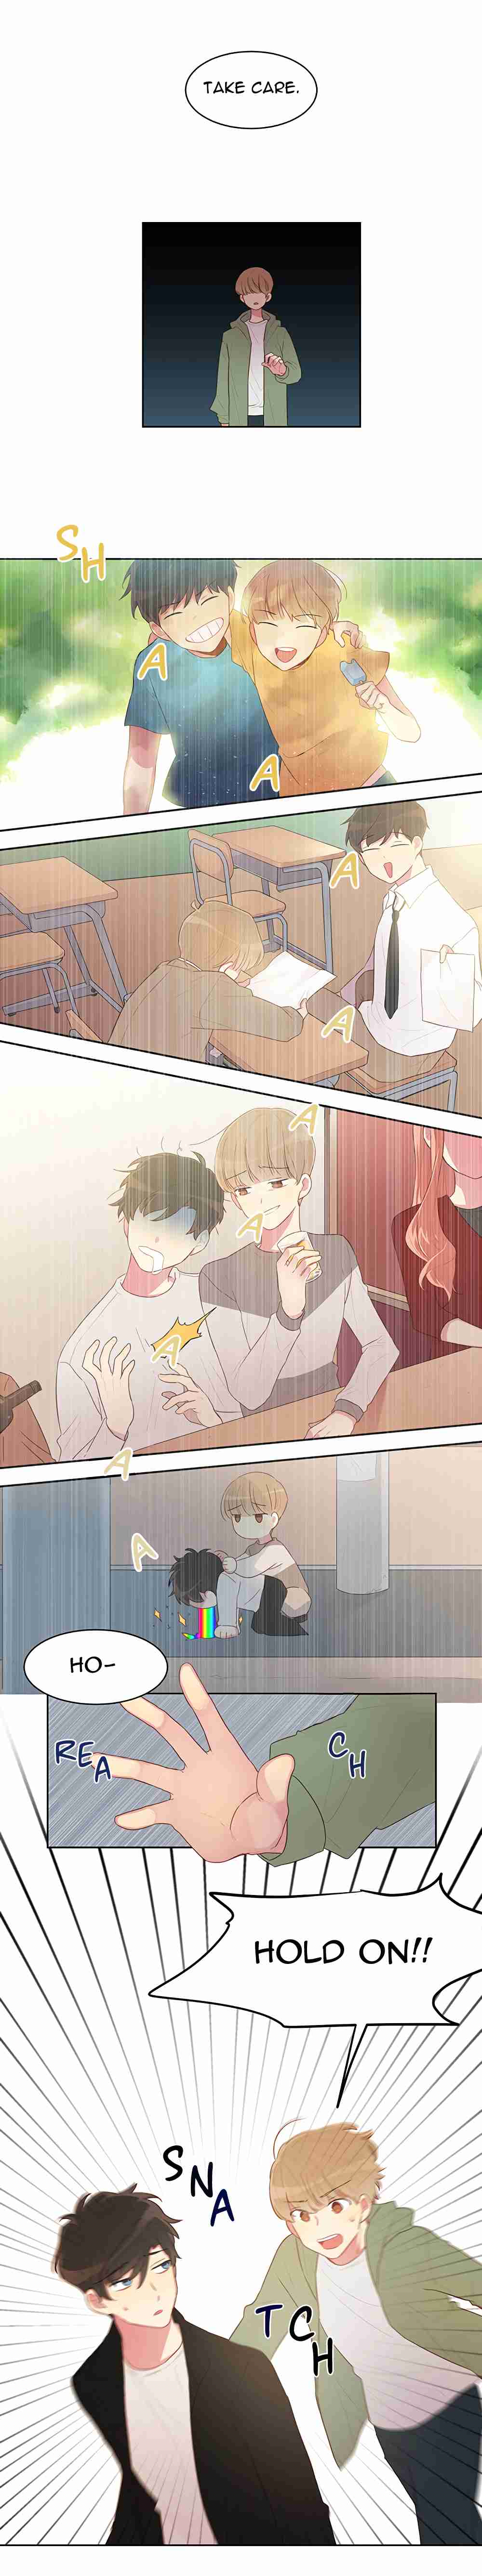 One Night with a Contract Boyfriend Ch. 1